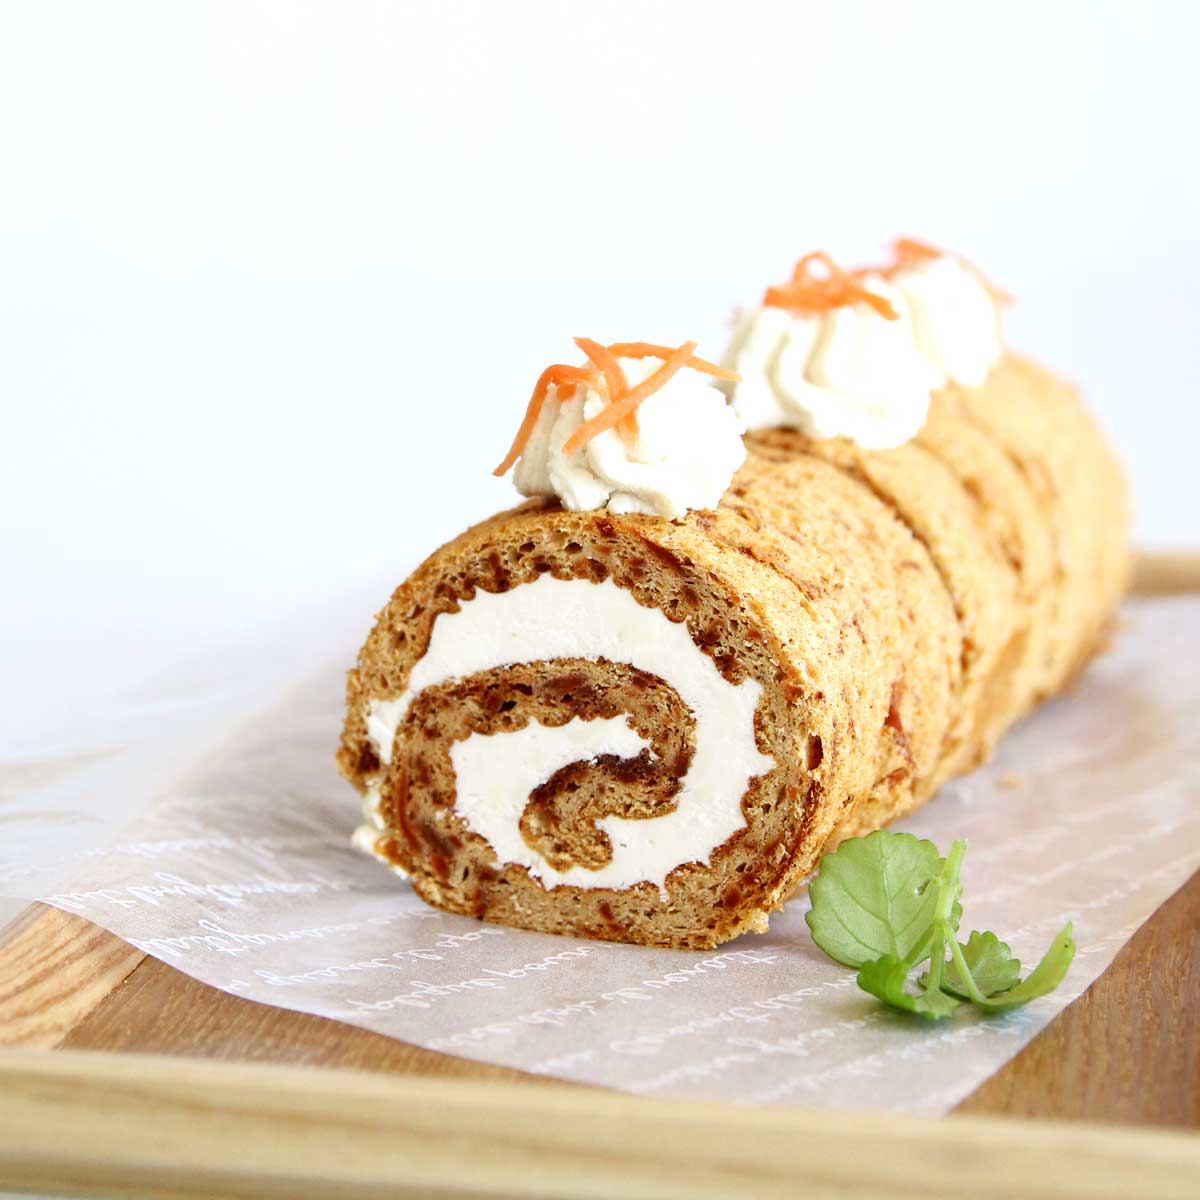 Gluten Free Carrot Swiss Roll Cake Recipe to Make for Easter - Strawberry Whipped Cream